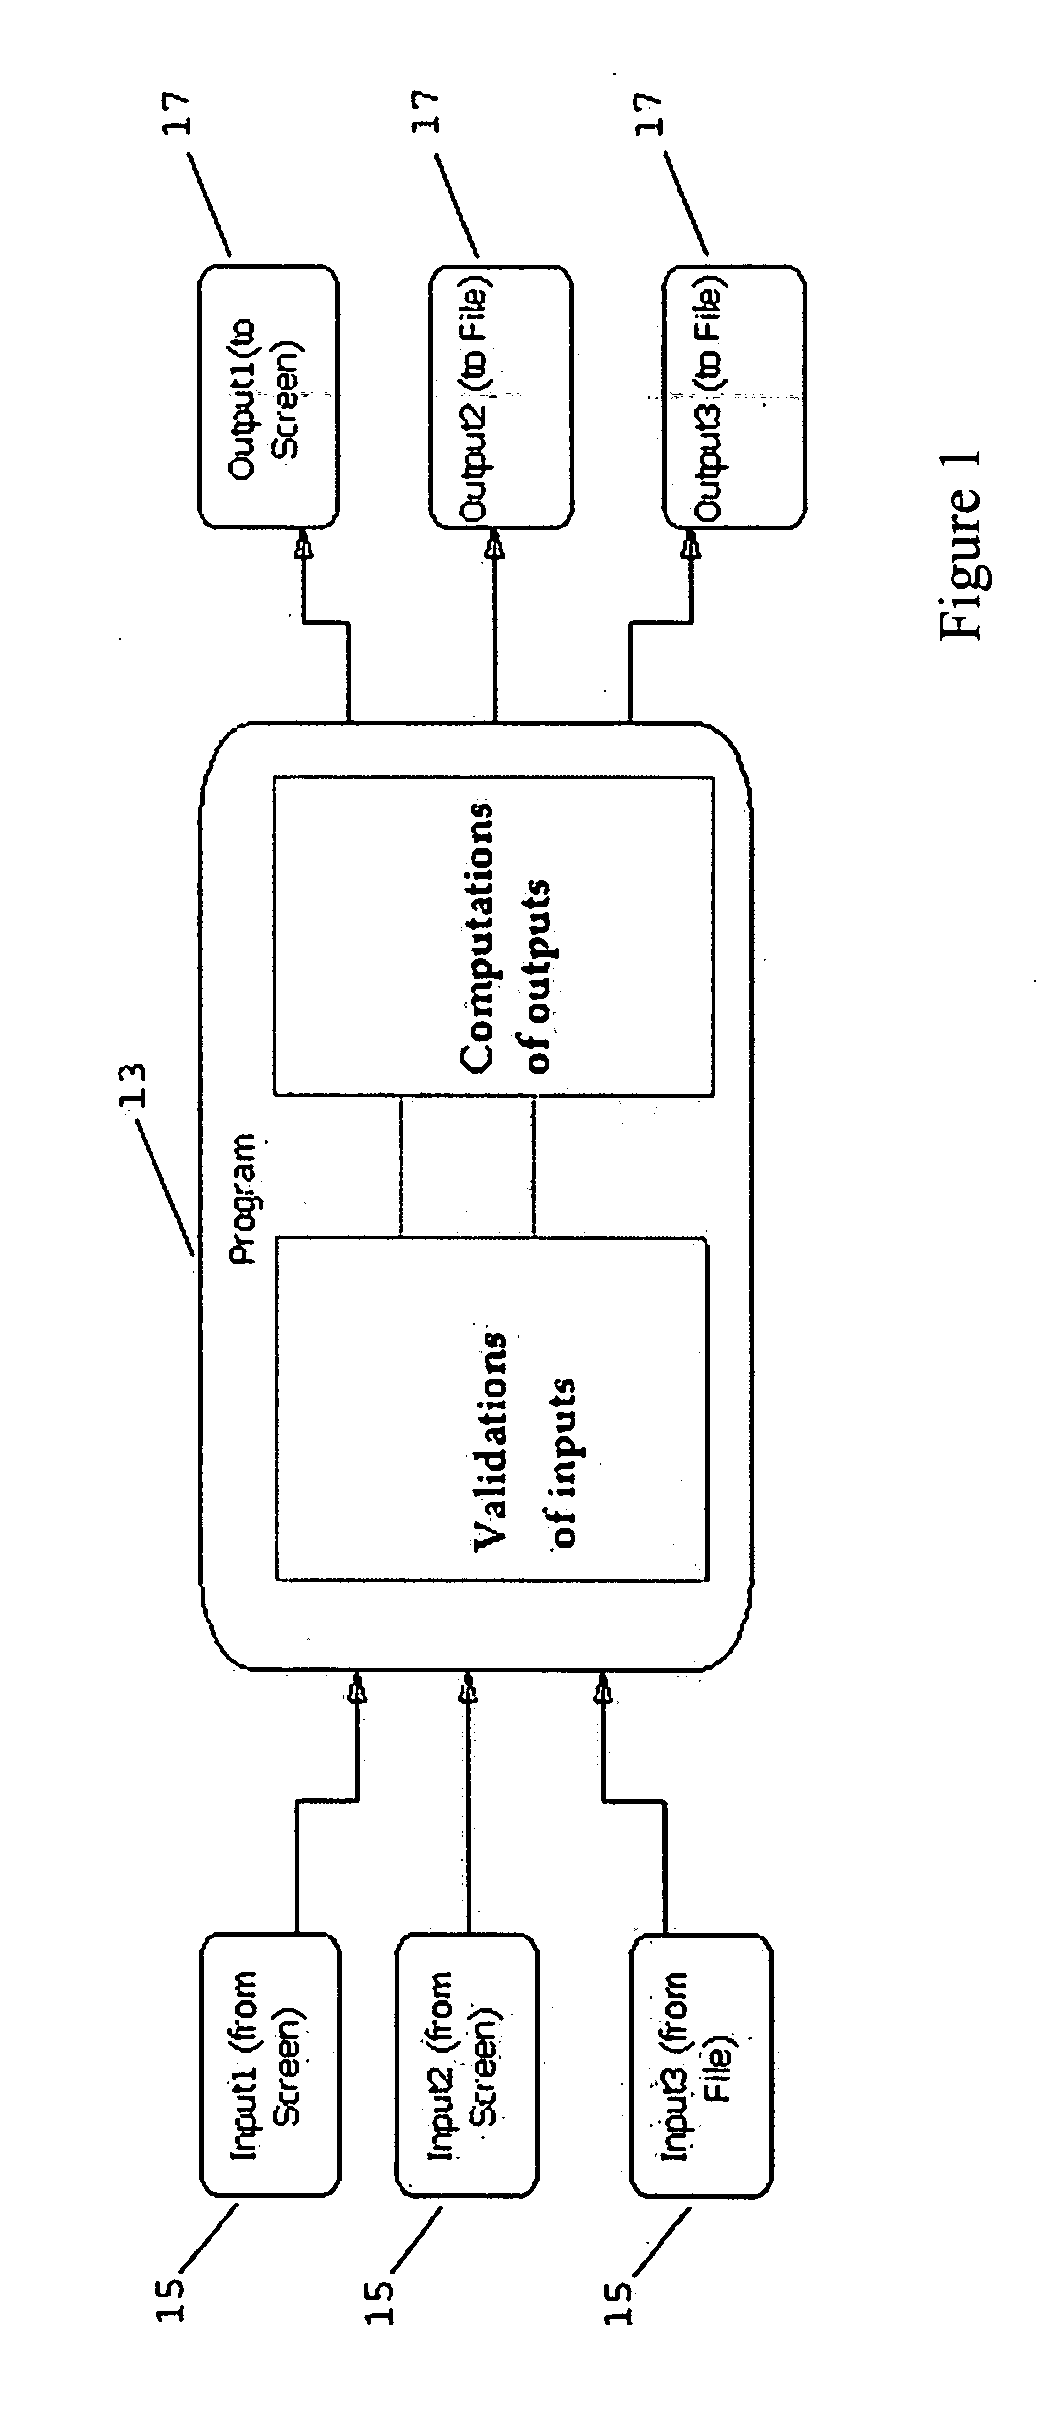 System and method for deriving an object oriented design from the business rules of a legacy application